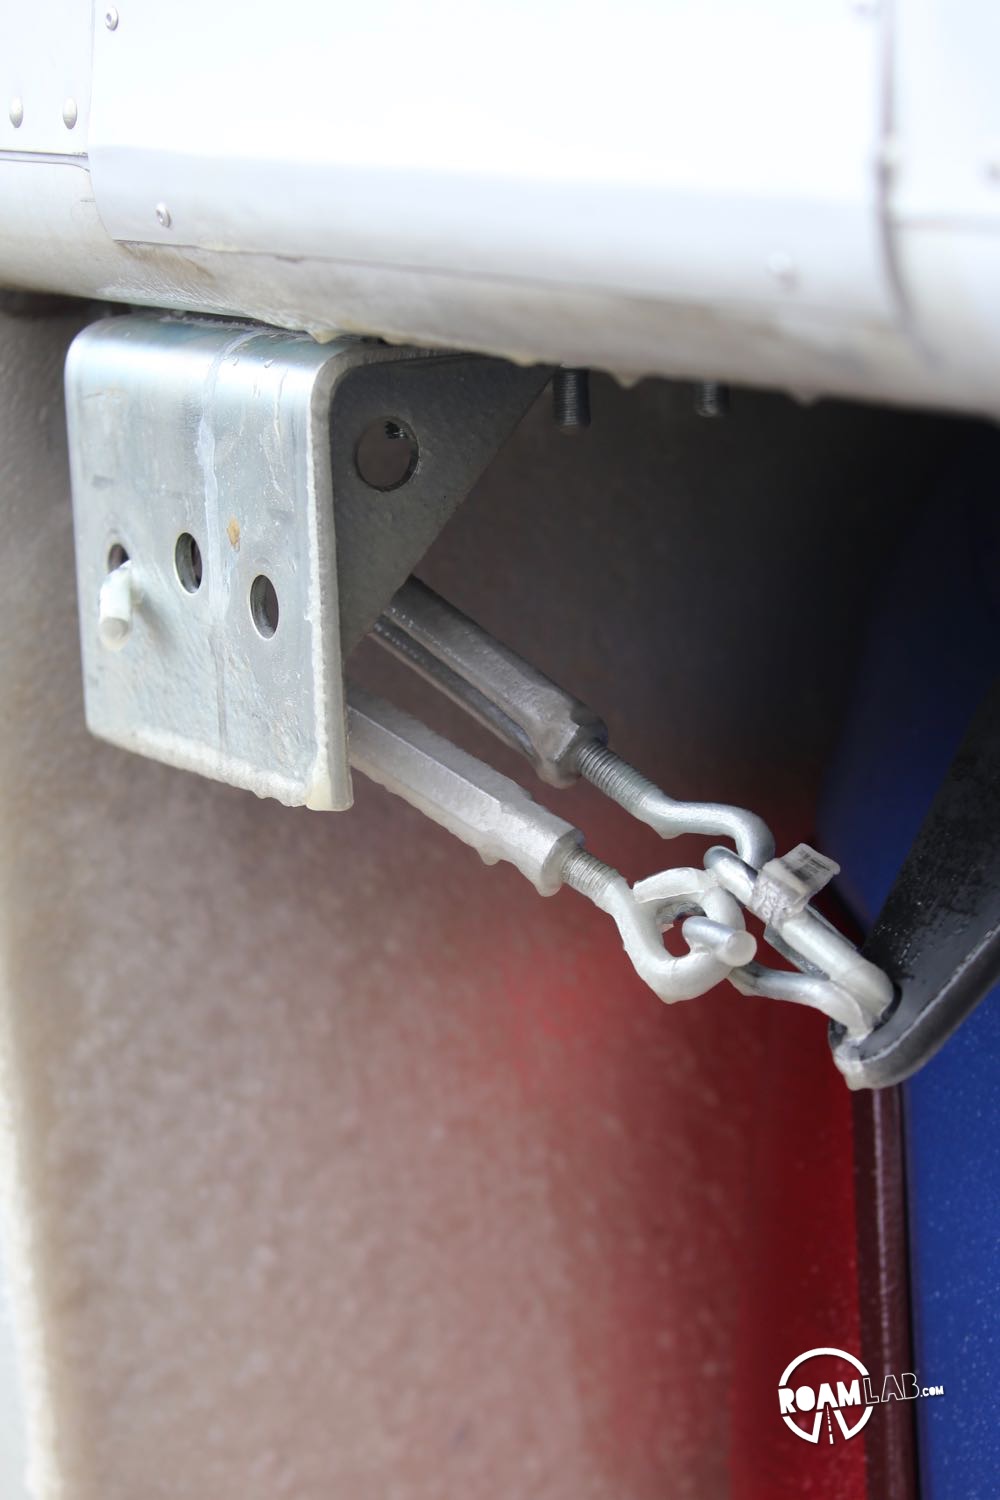 Two small turnbuckles connecting a Brophy Tie-Down and truck camper jack bracket, frozen in place.